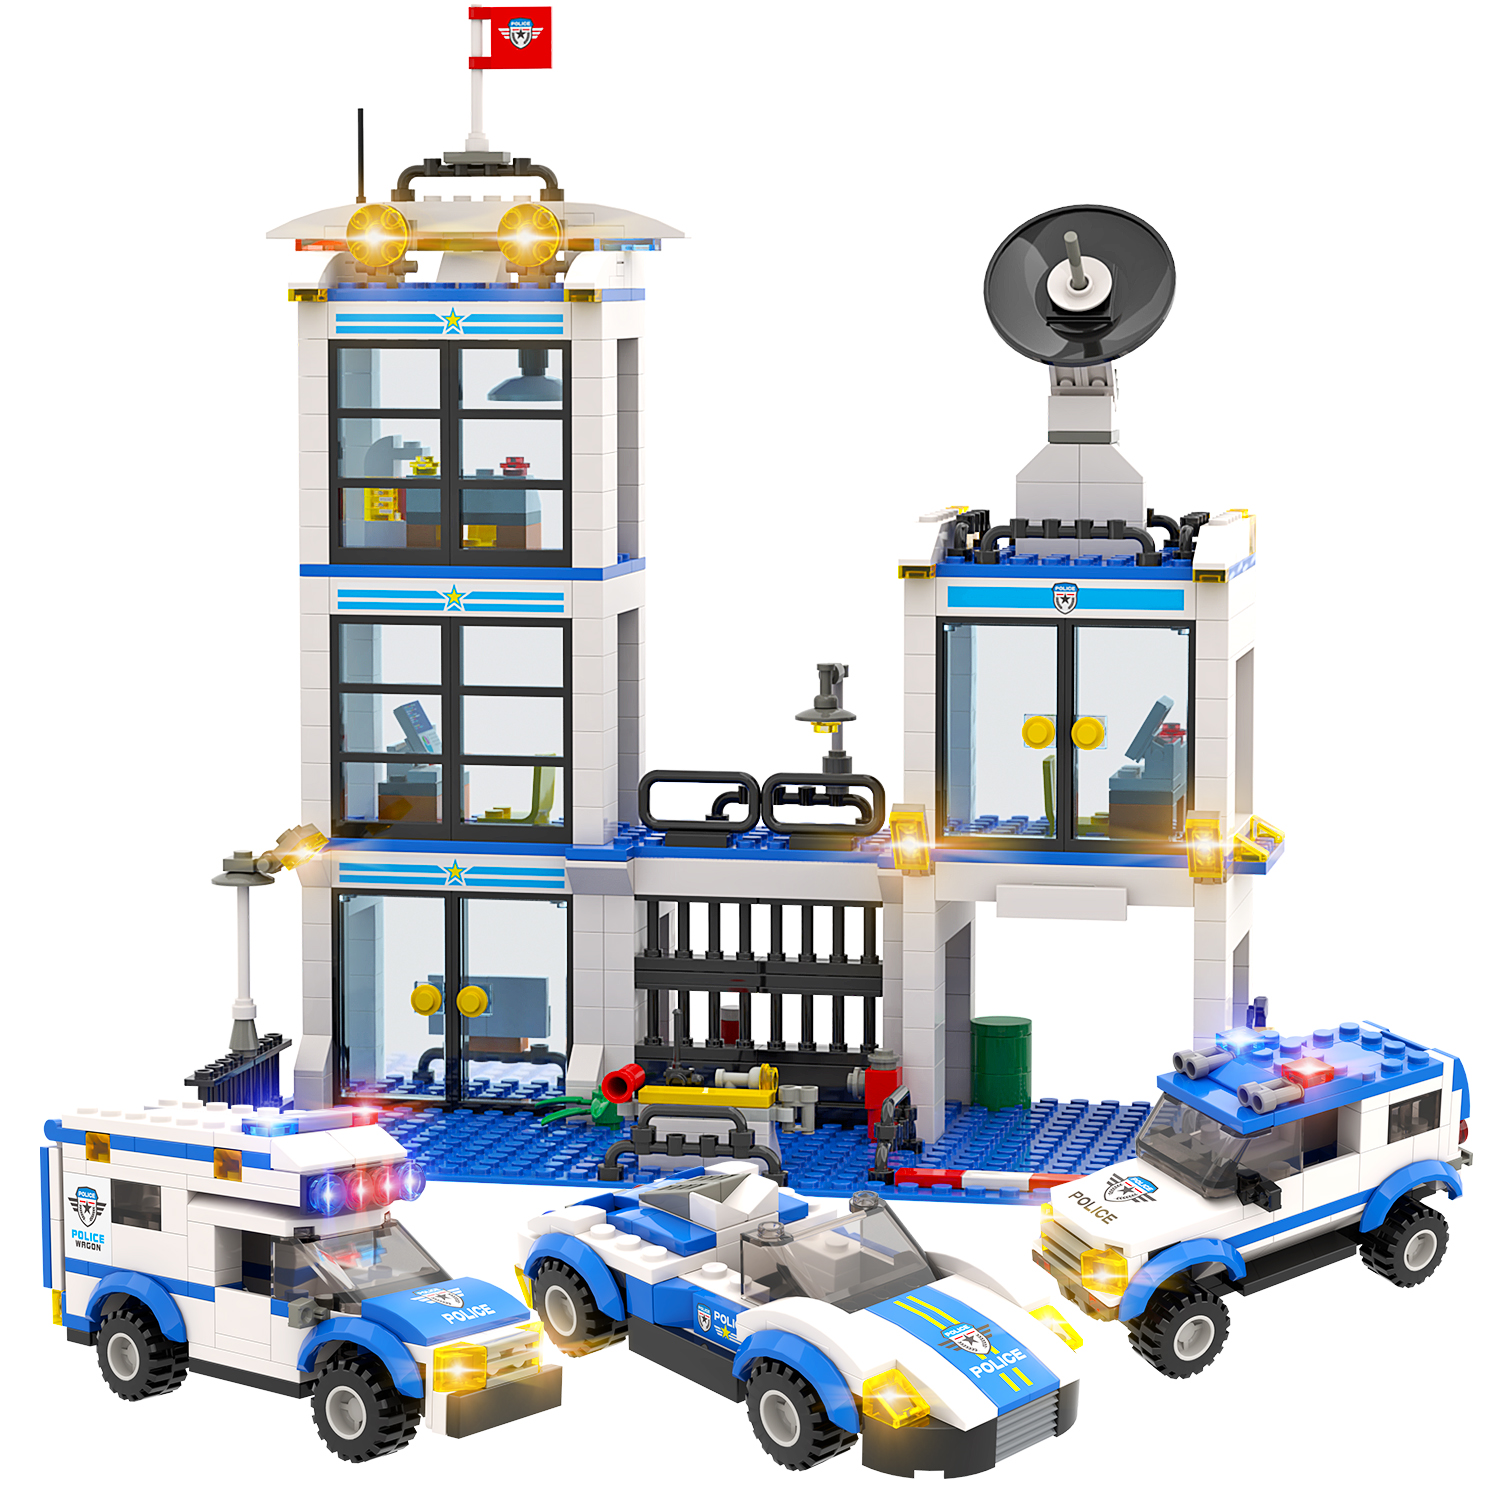 Exercise N Play 736 Pieces City Police Station Building Kit, Police Car  Toy, City Police Blocks Sets with Cop Car & Patrol Vehicles Gift for Boys  